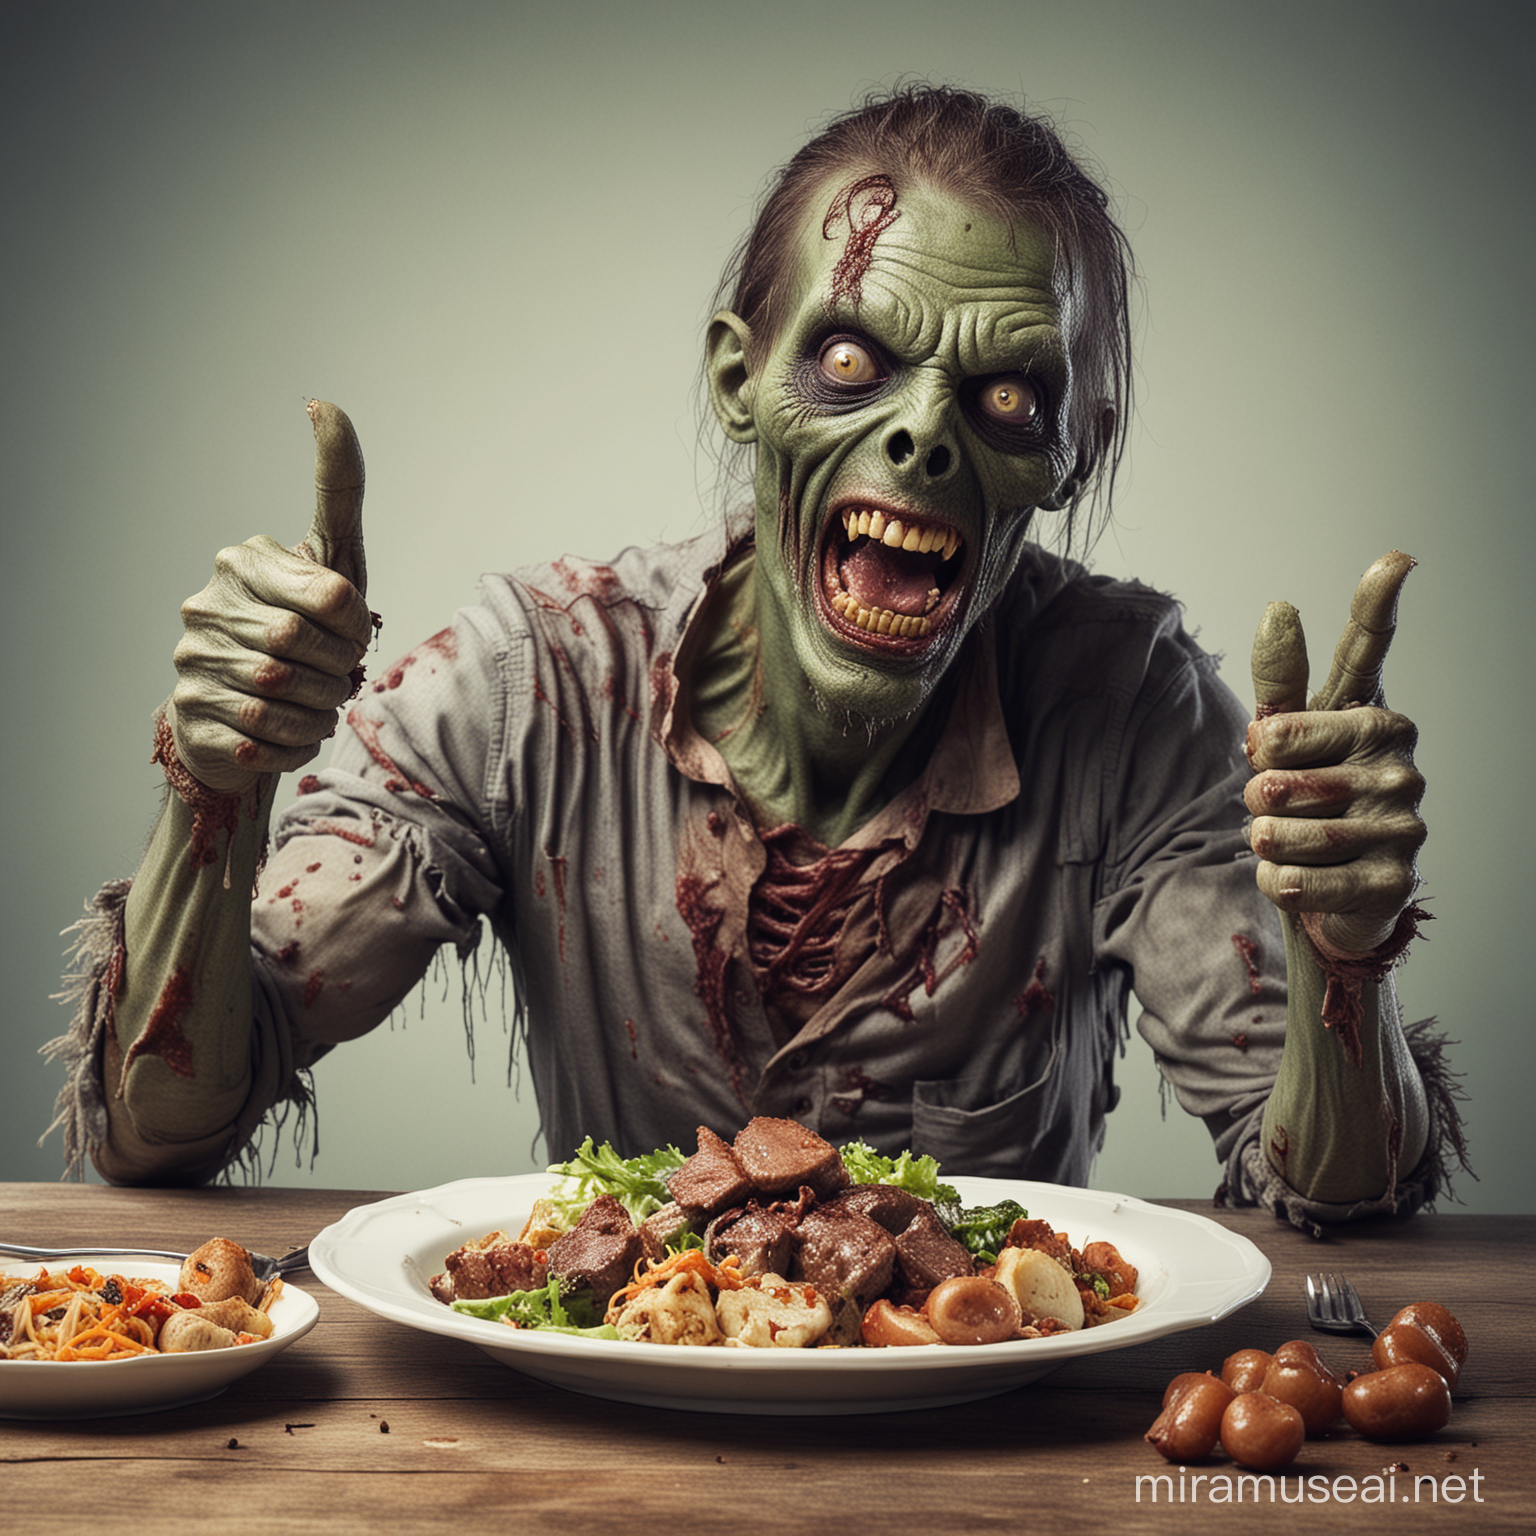 Cheerful Undead Enjoying Meal with a Positive Gesture